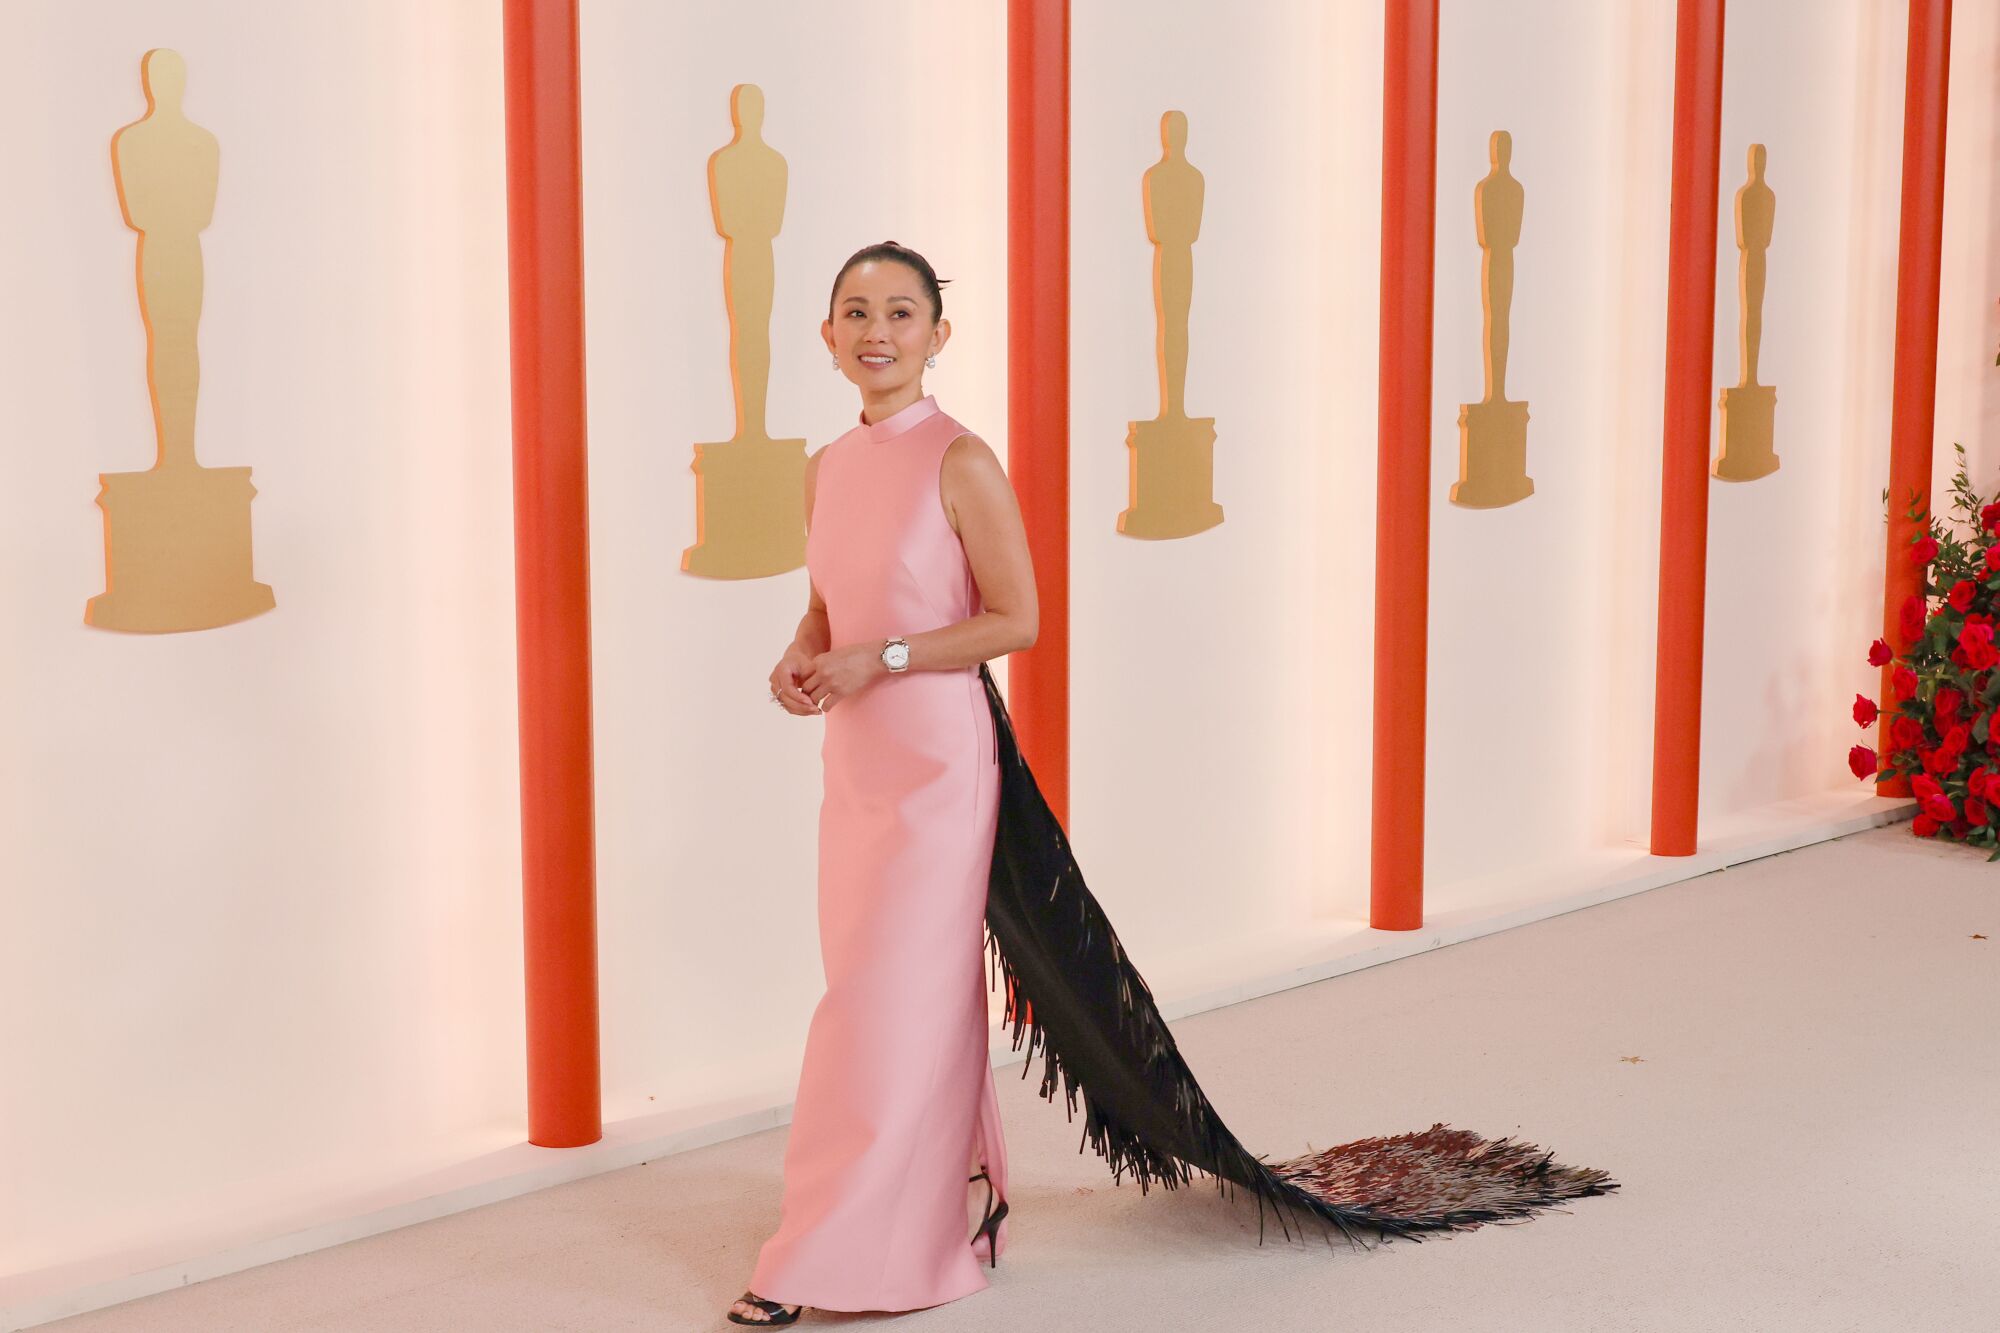 Hong Chau in a pink gown with a darker colored, fringed train.